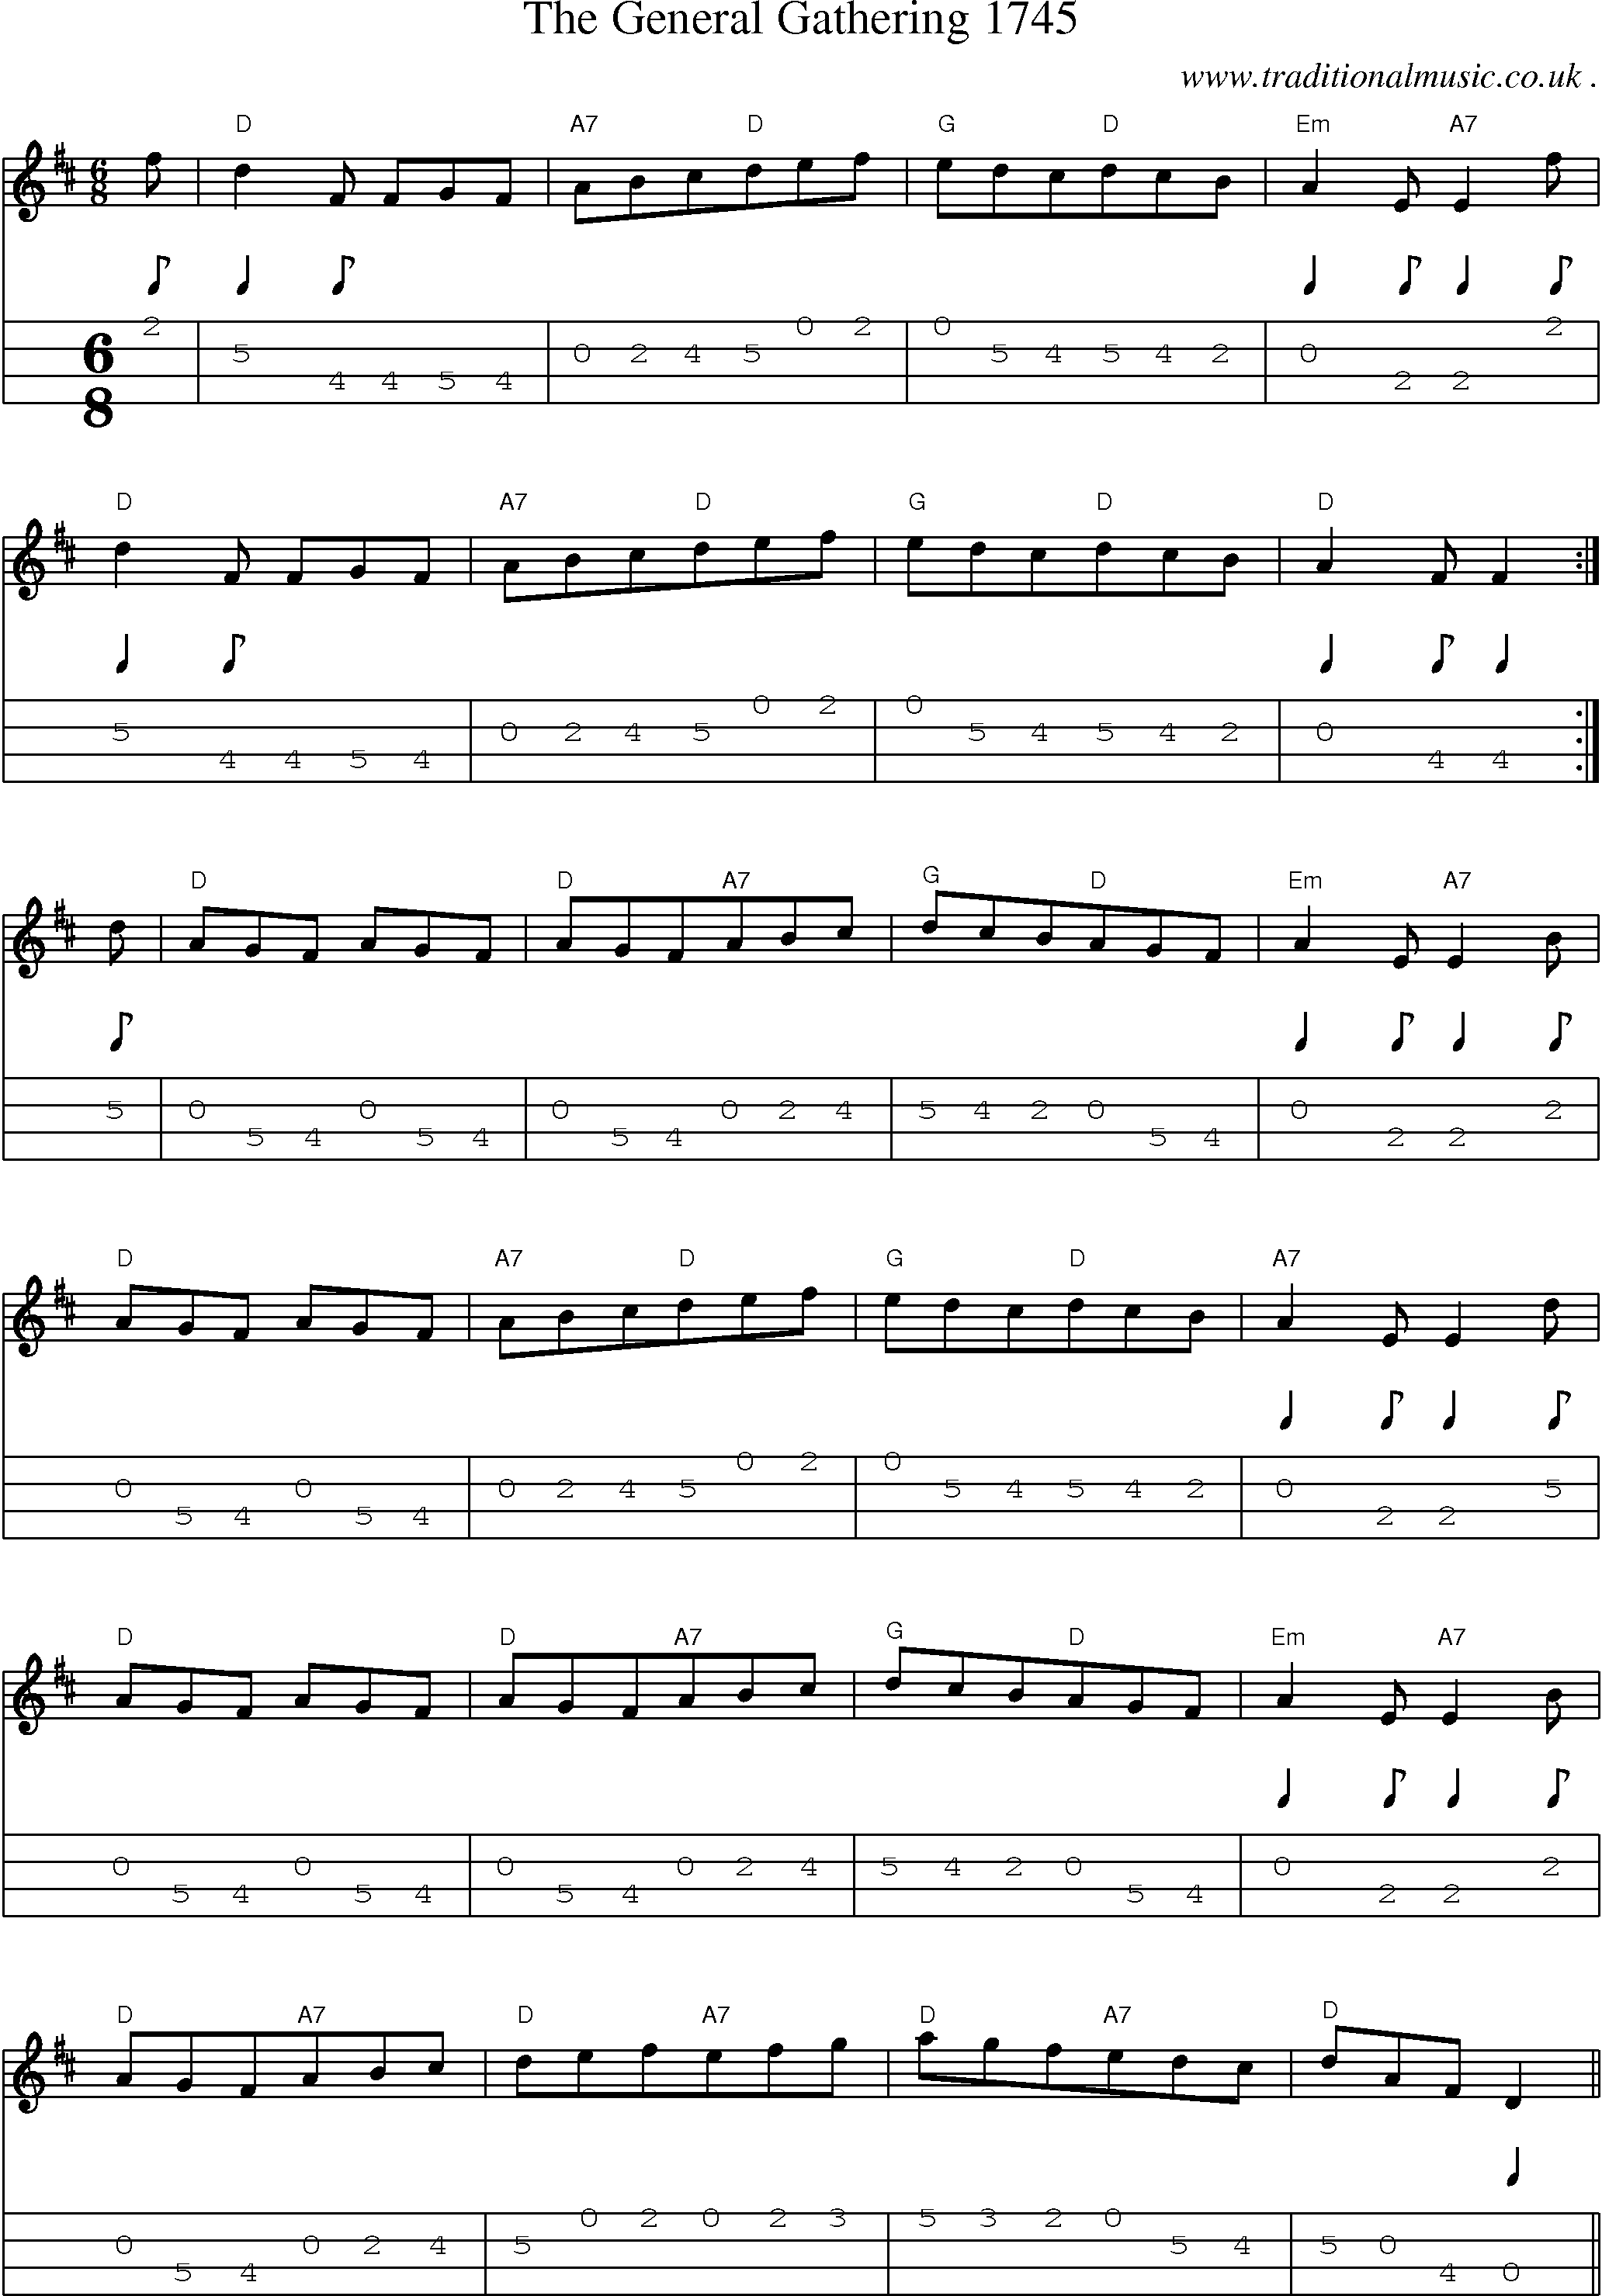 Sheet-Music and Mandolin Tabs for The General Gathering 1745